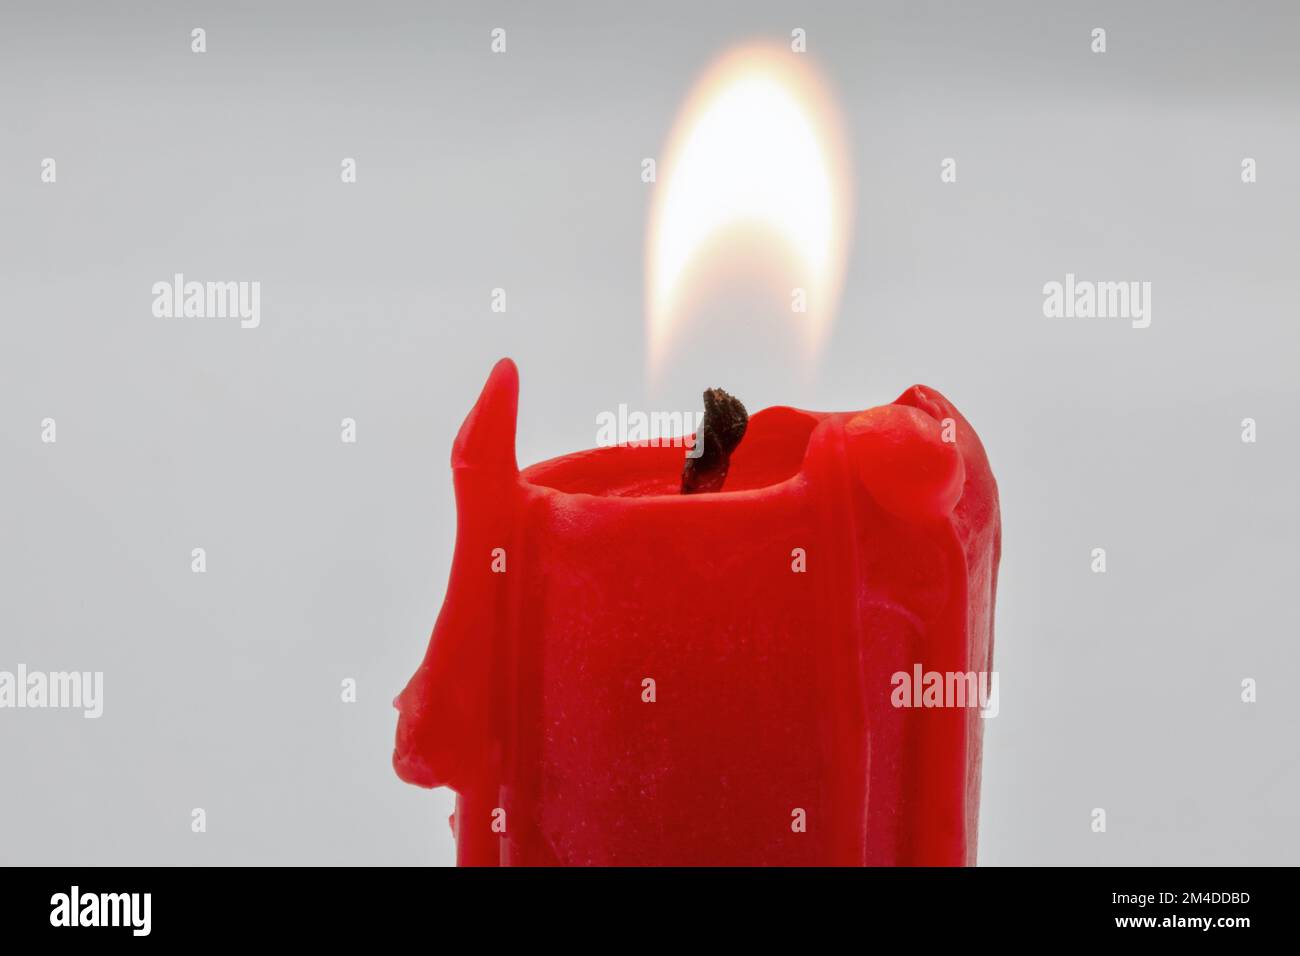 burning small red candle stub closeup on white background Stock Photo